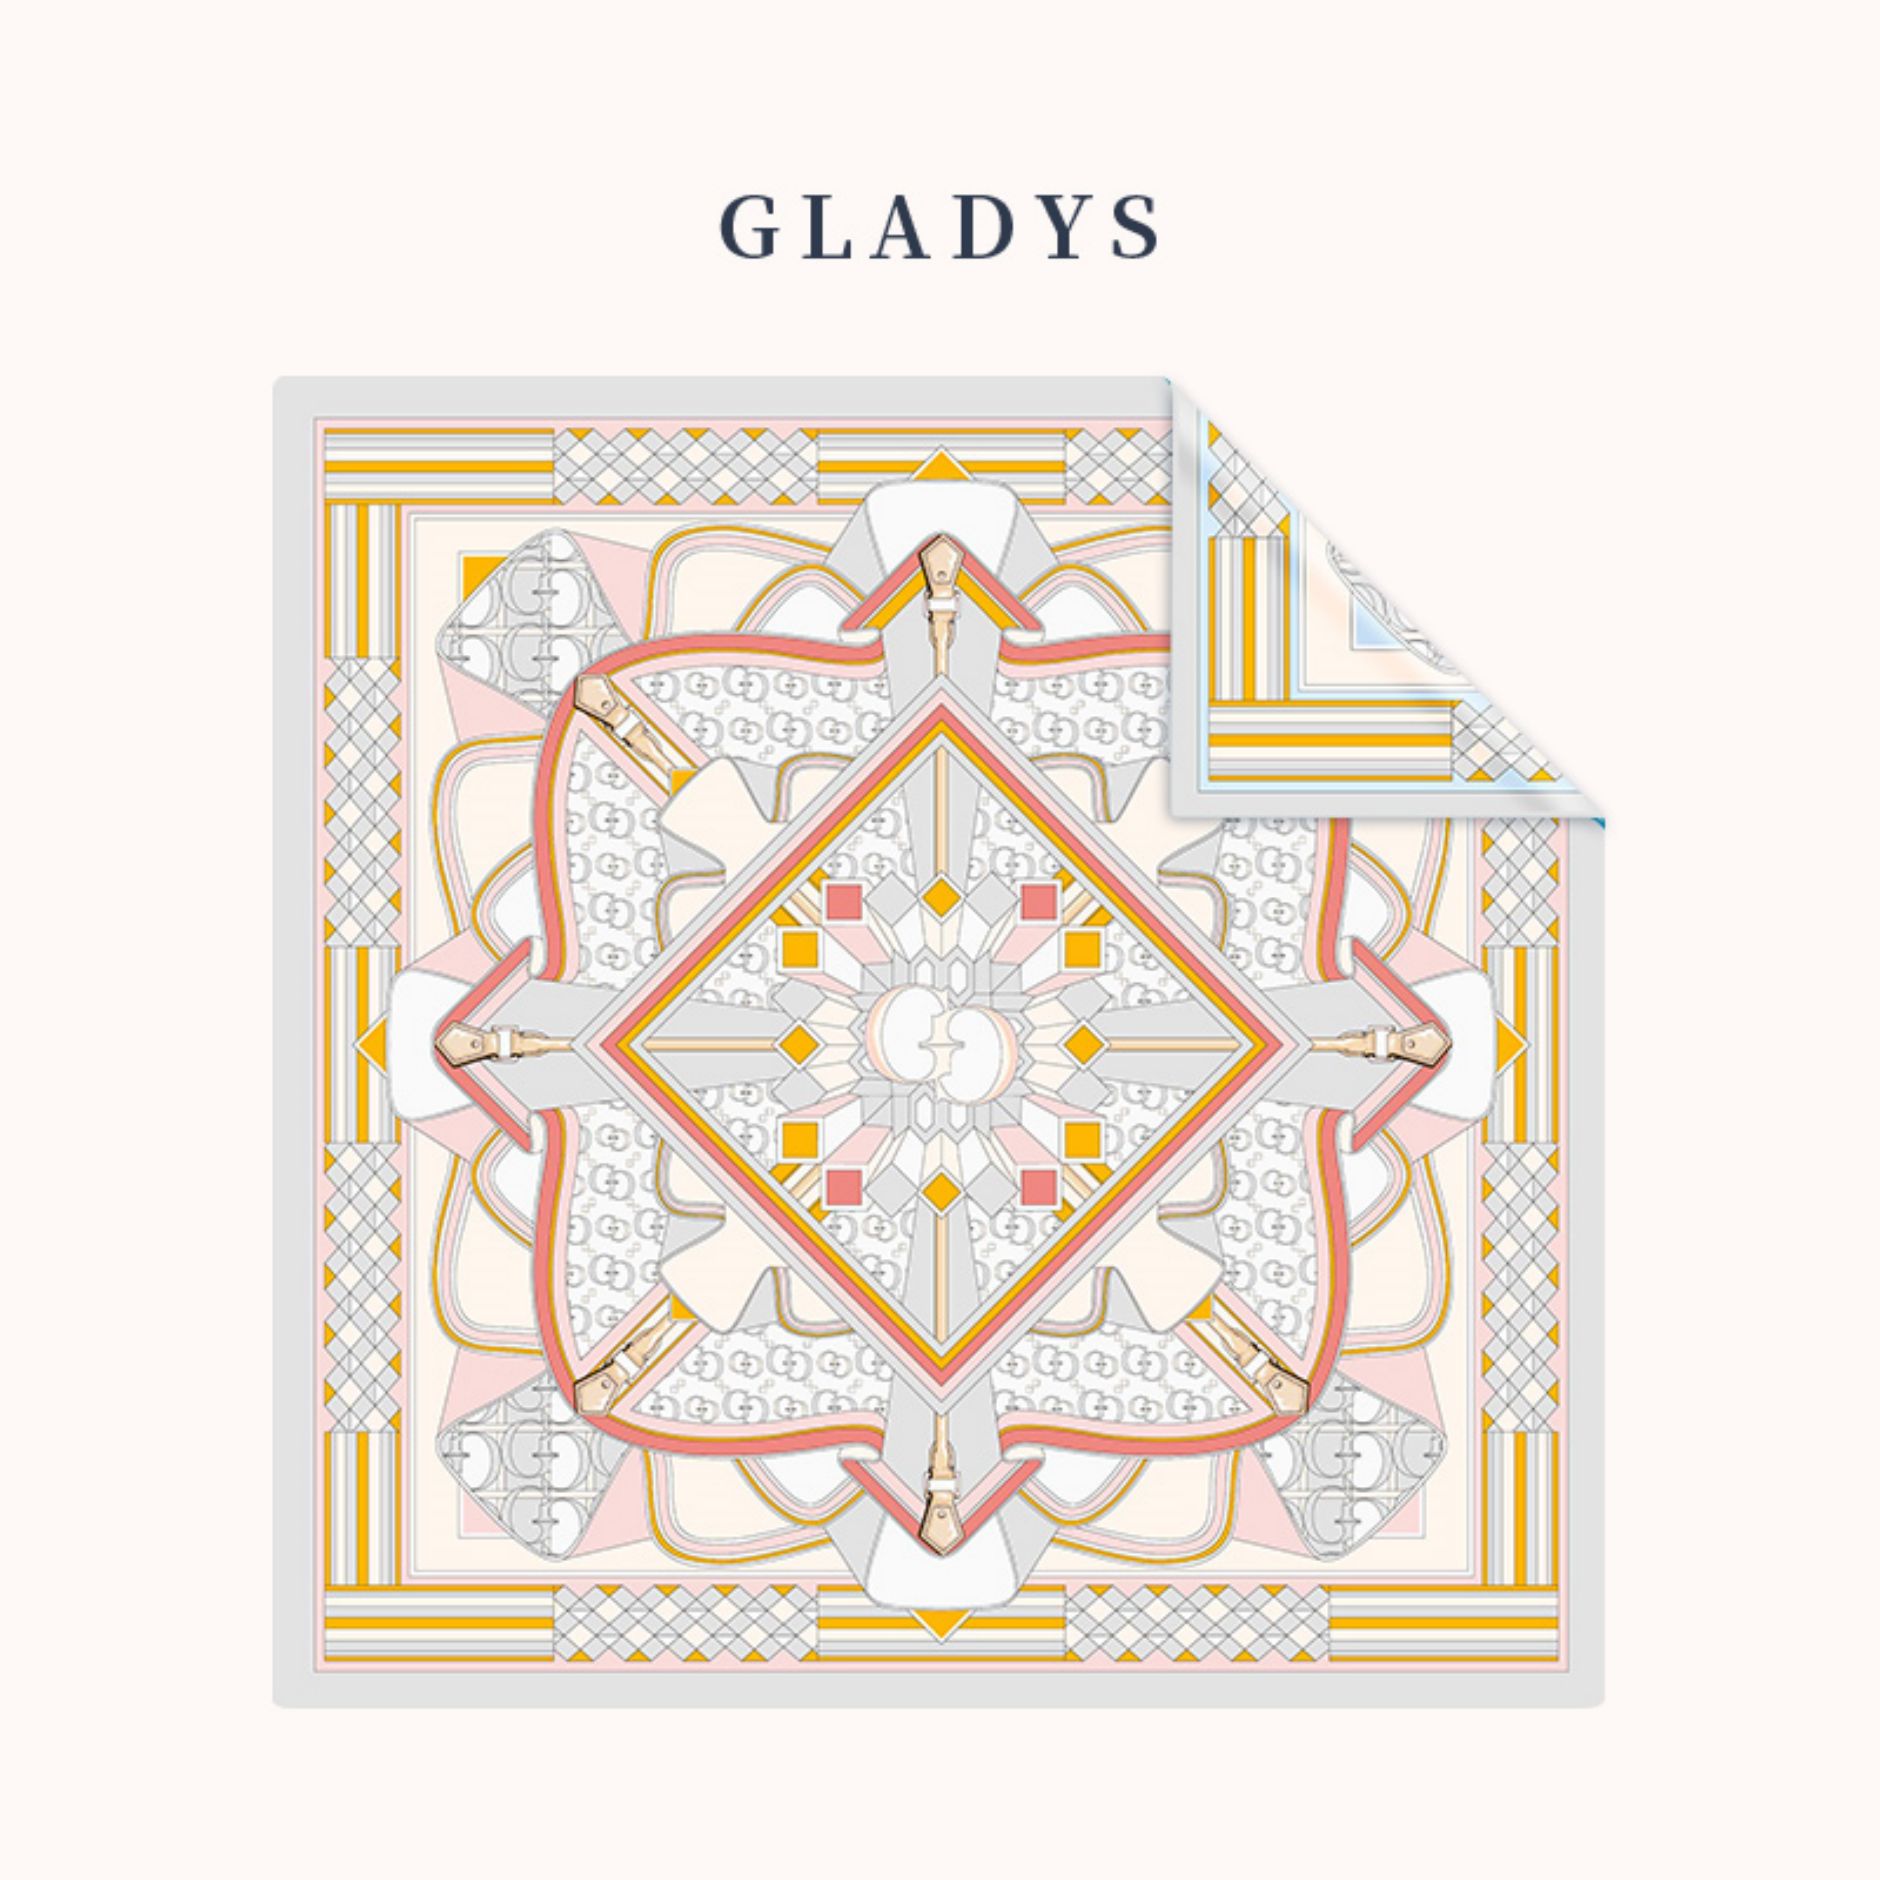 Luxurious Gladys Lifetime Double-sided Heterochromatic Printed Silk Scarf for Women